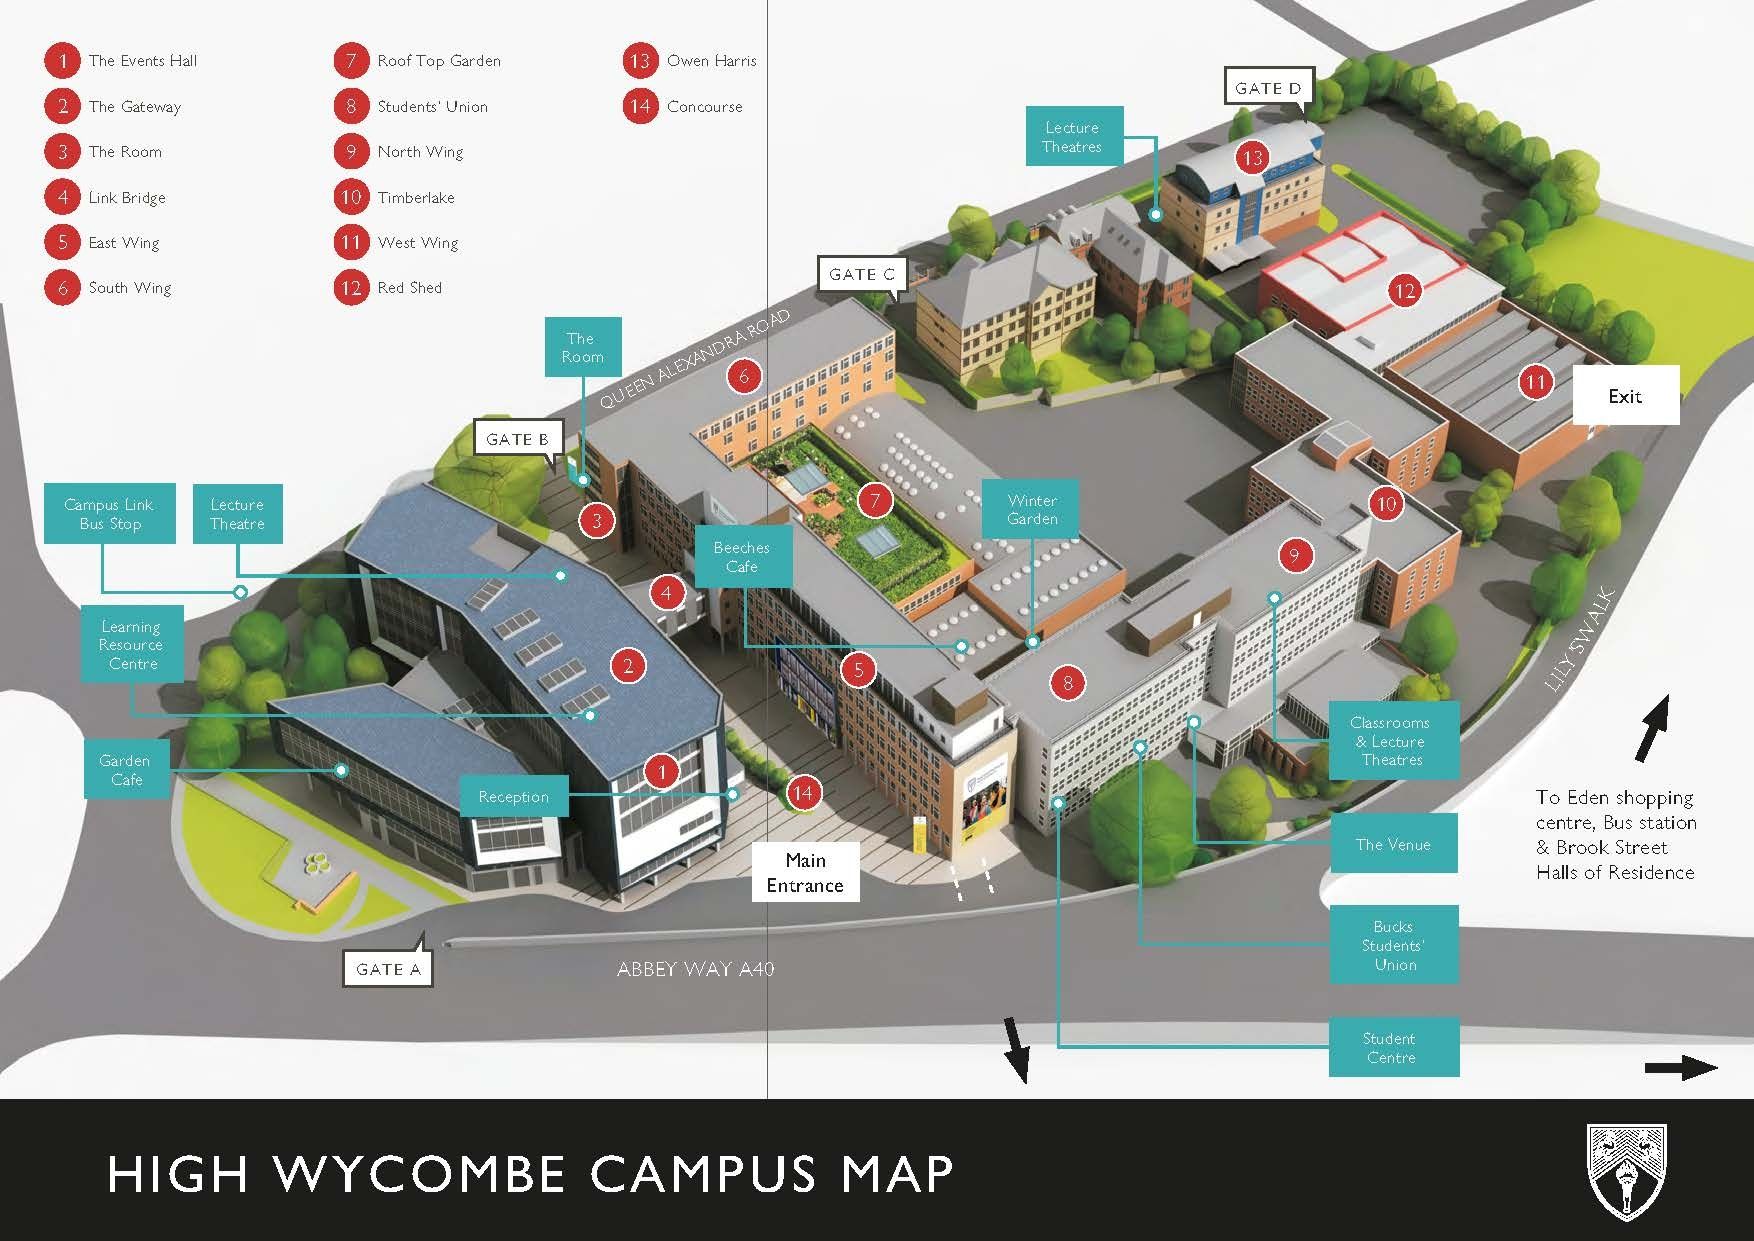 A map of BNU's High Wycombe campus.